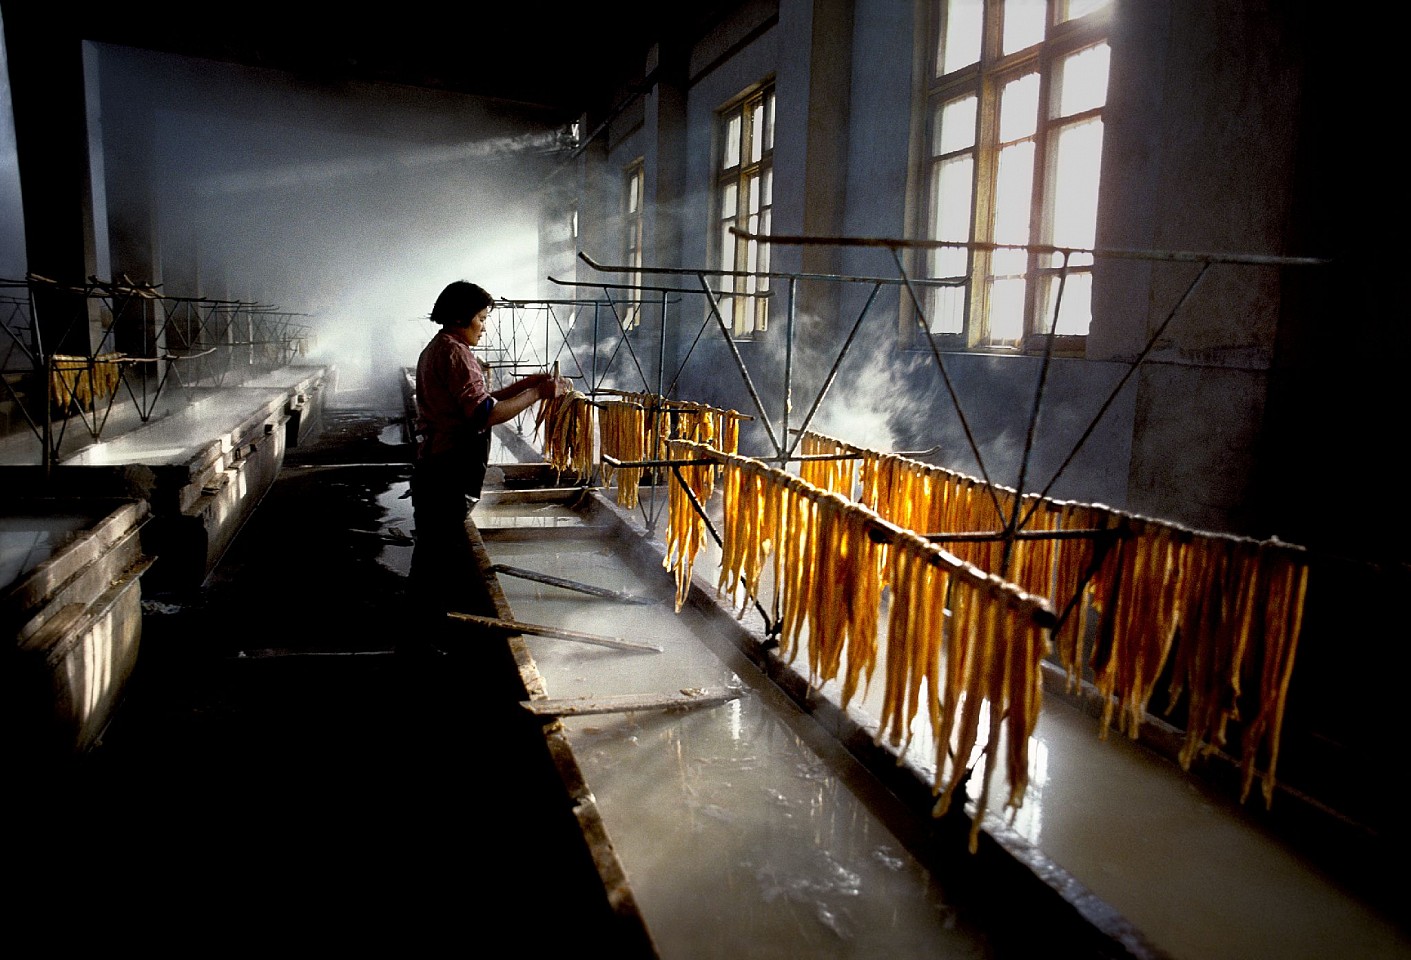 Steve McCurry, Woman Prepares Noodles, 1984
FujiFlex Crystal Archive Print
Price/Size on request